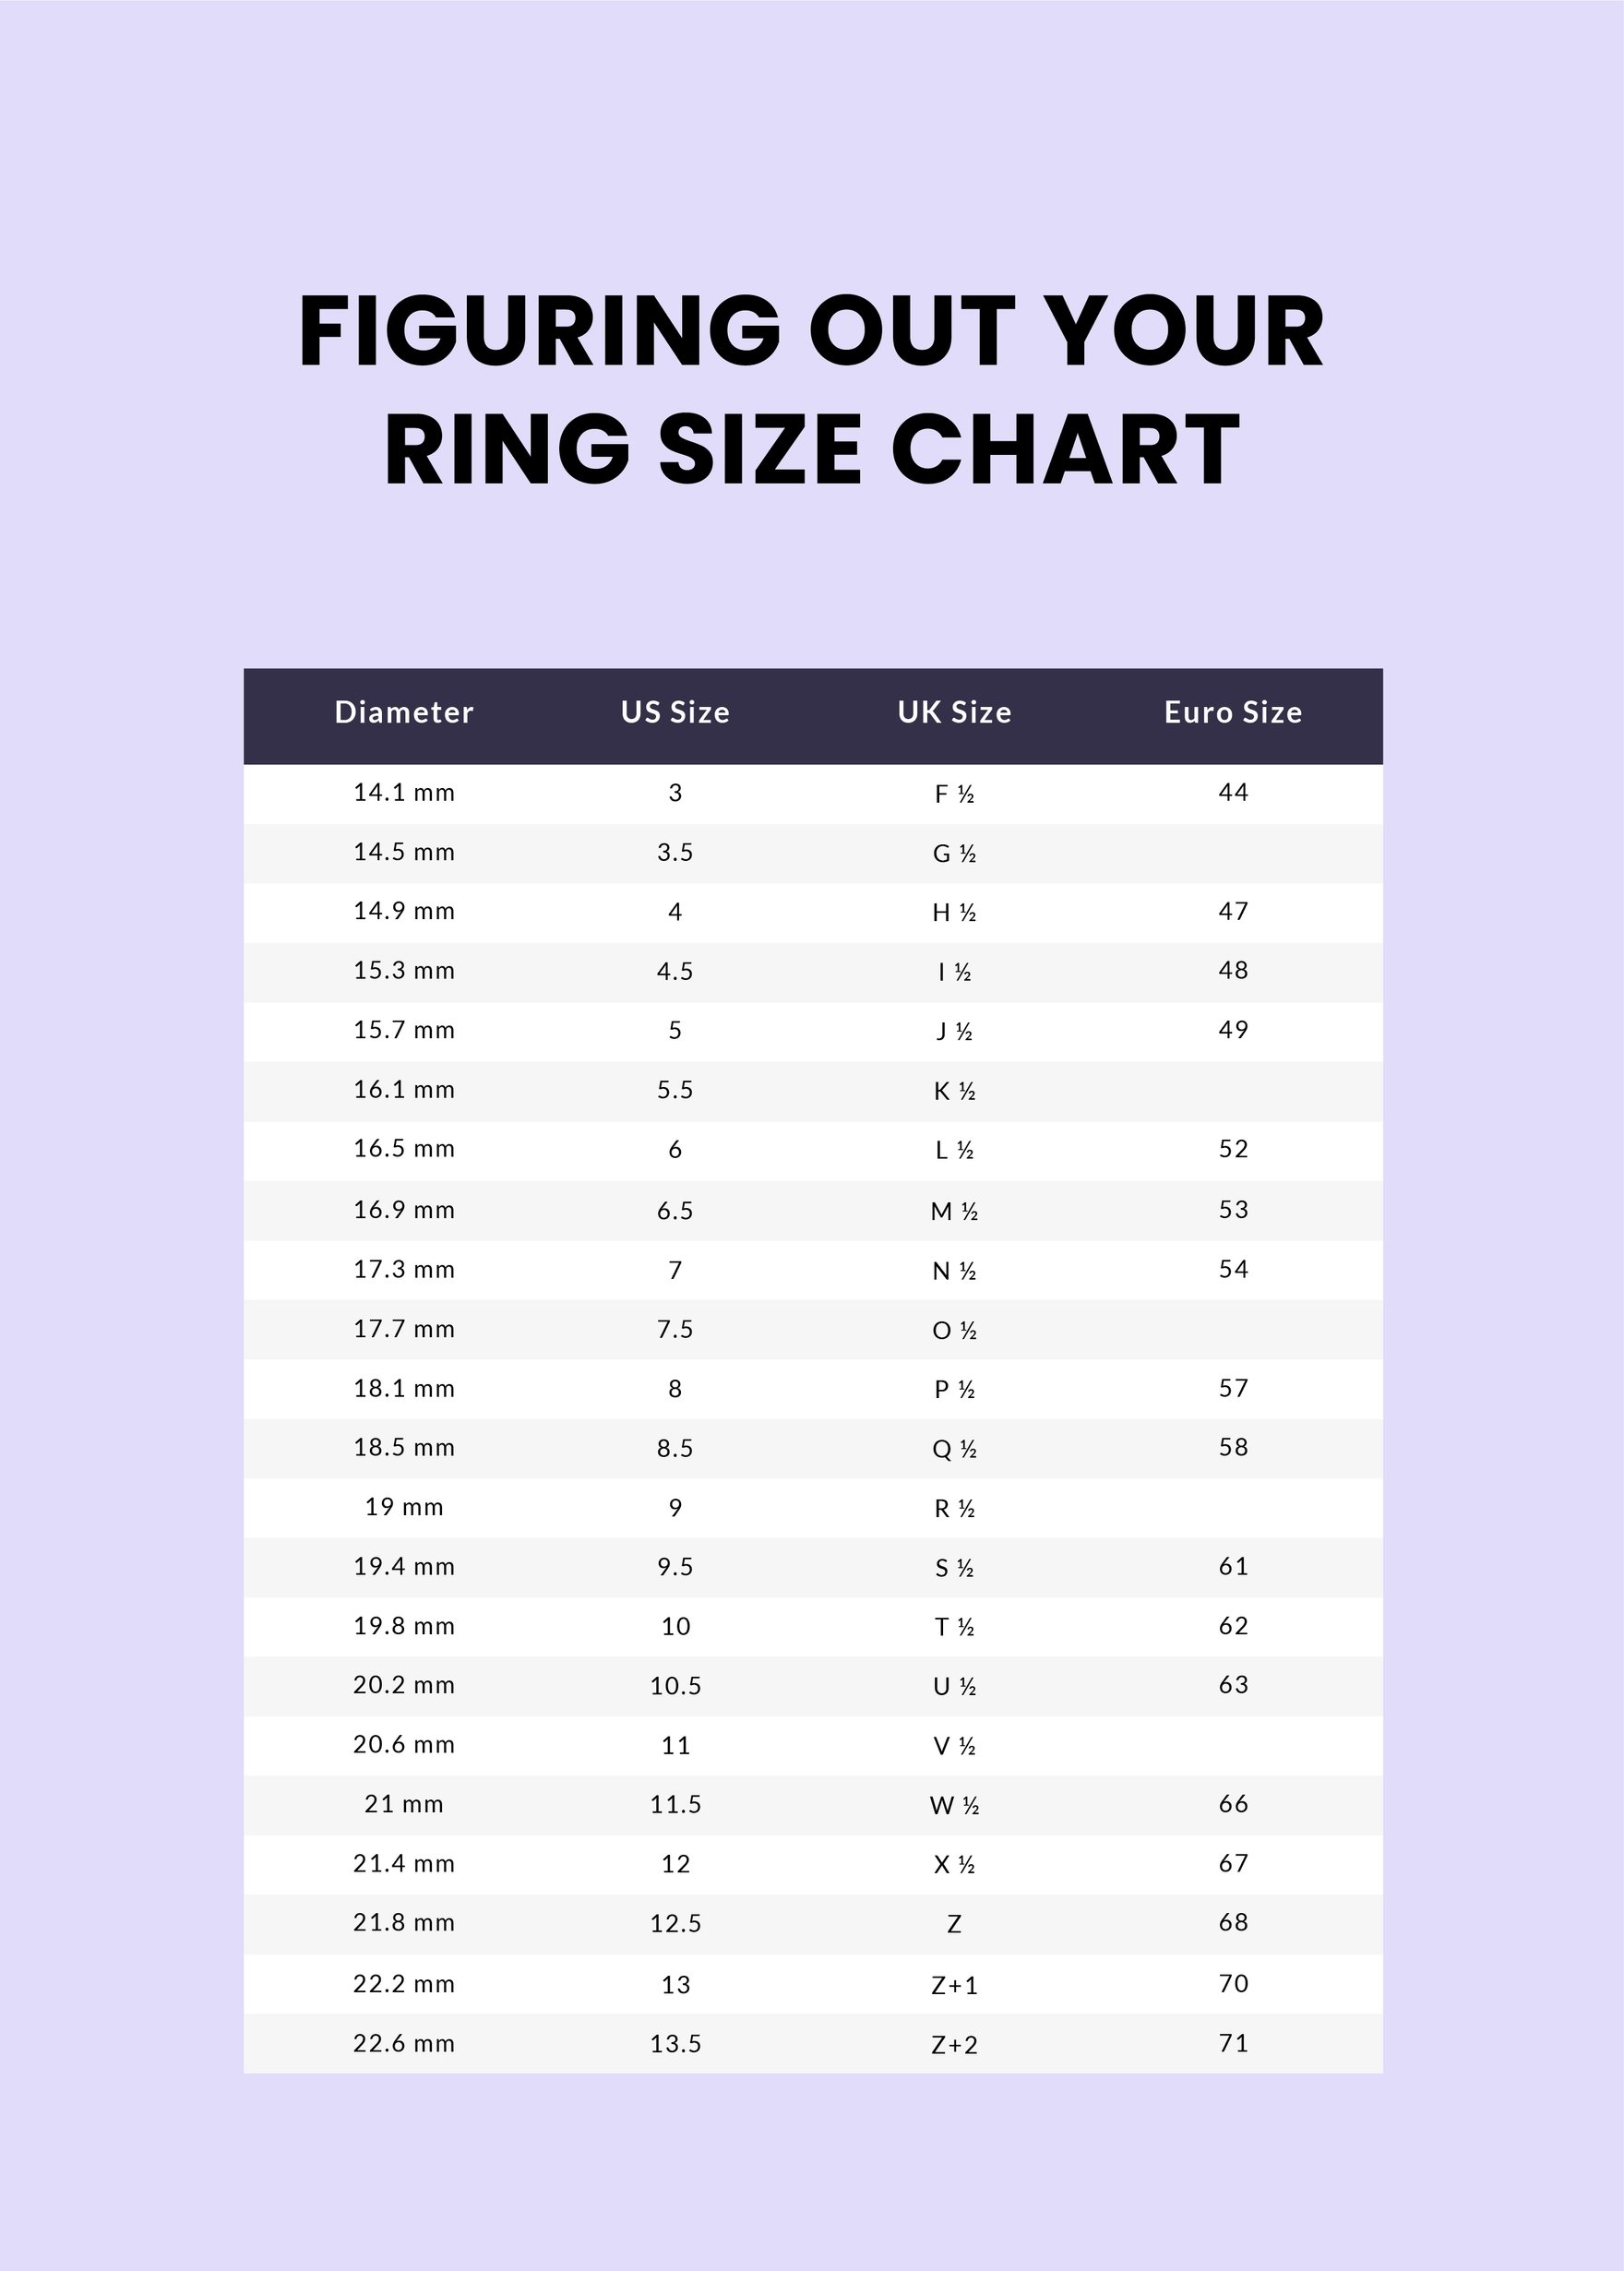 Figuring Out Your Ring Size Chart Template in PDF, Illustrator